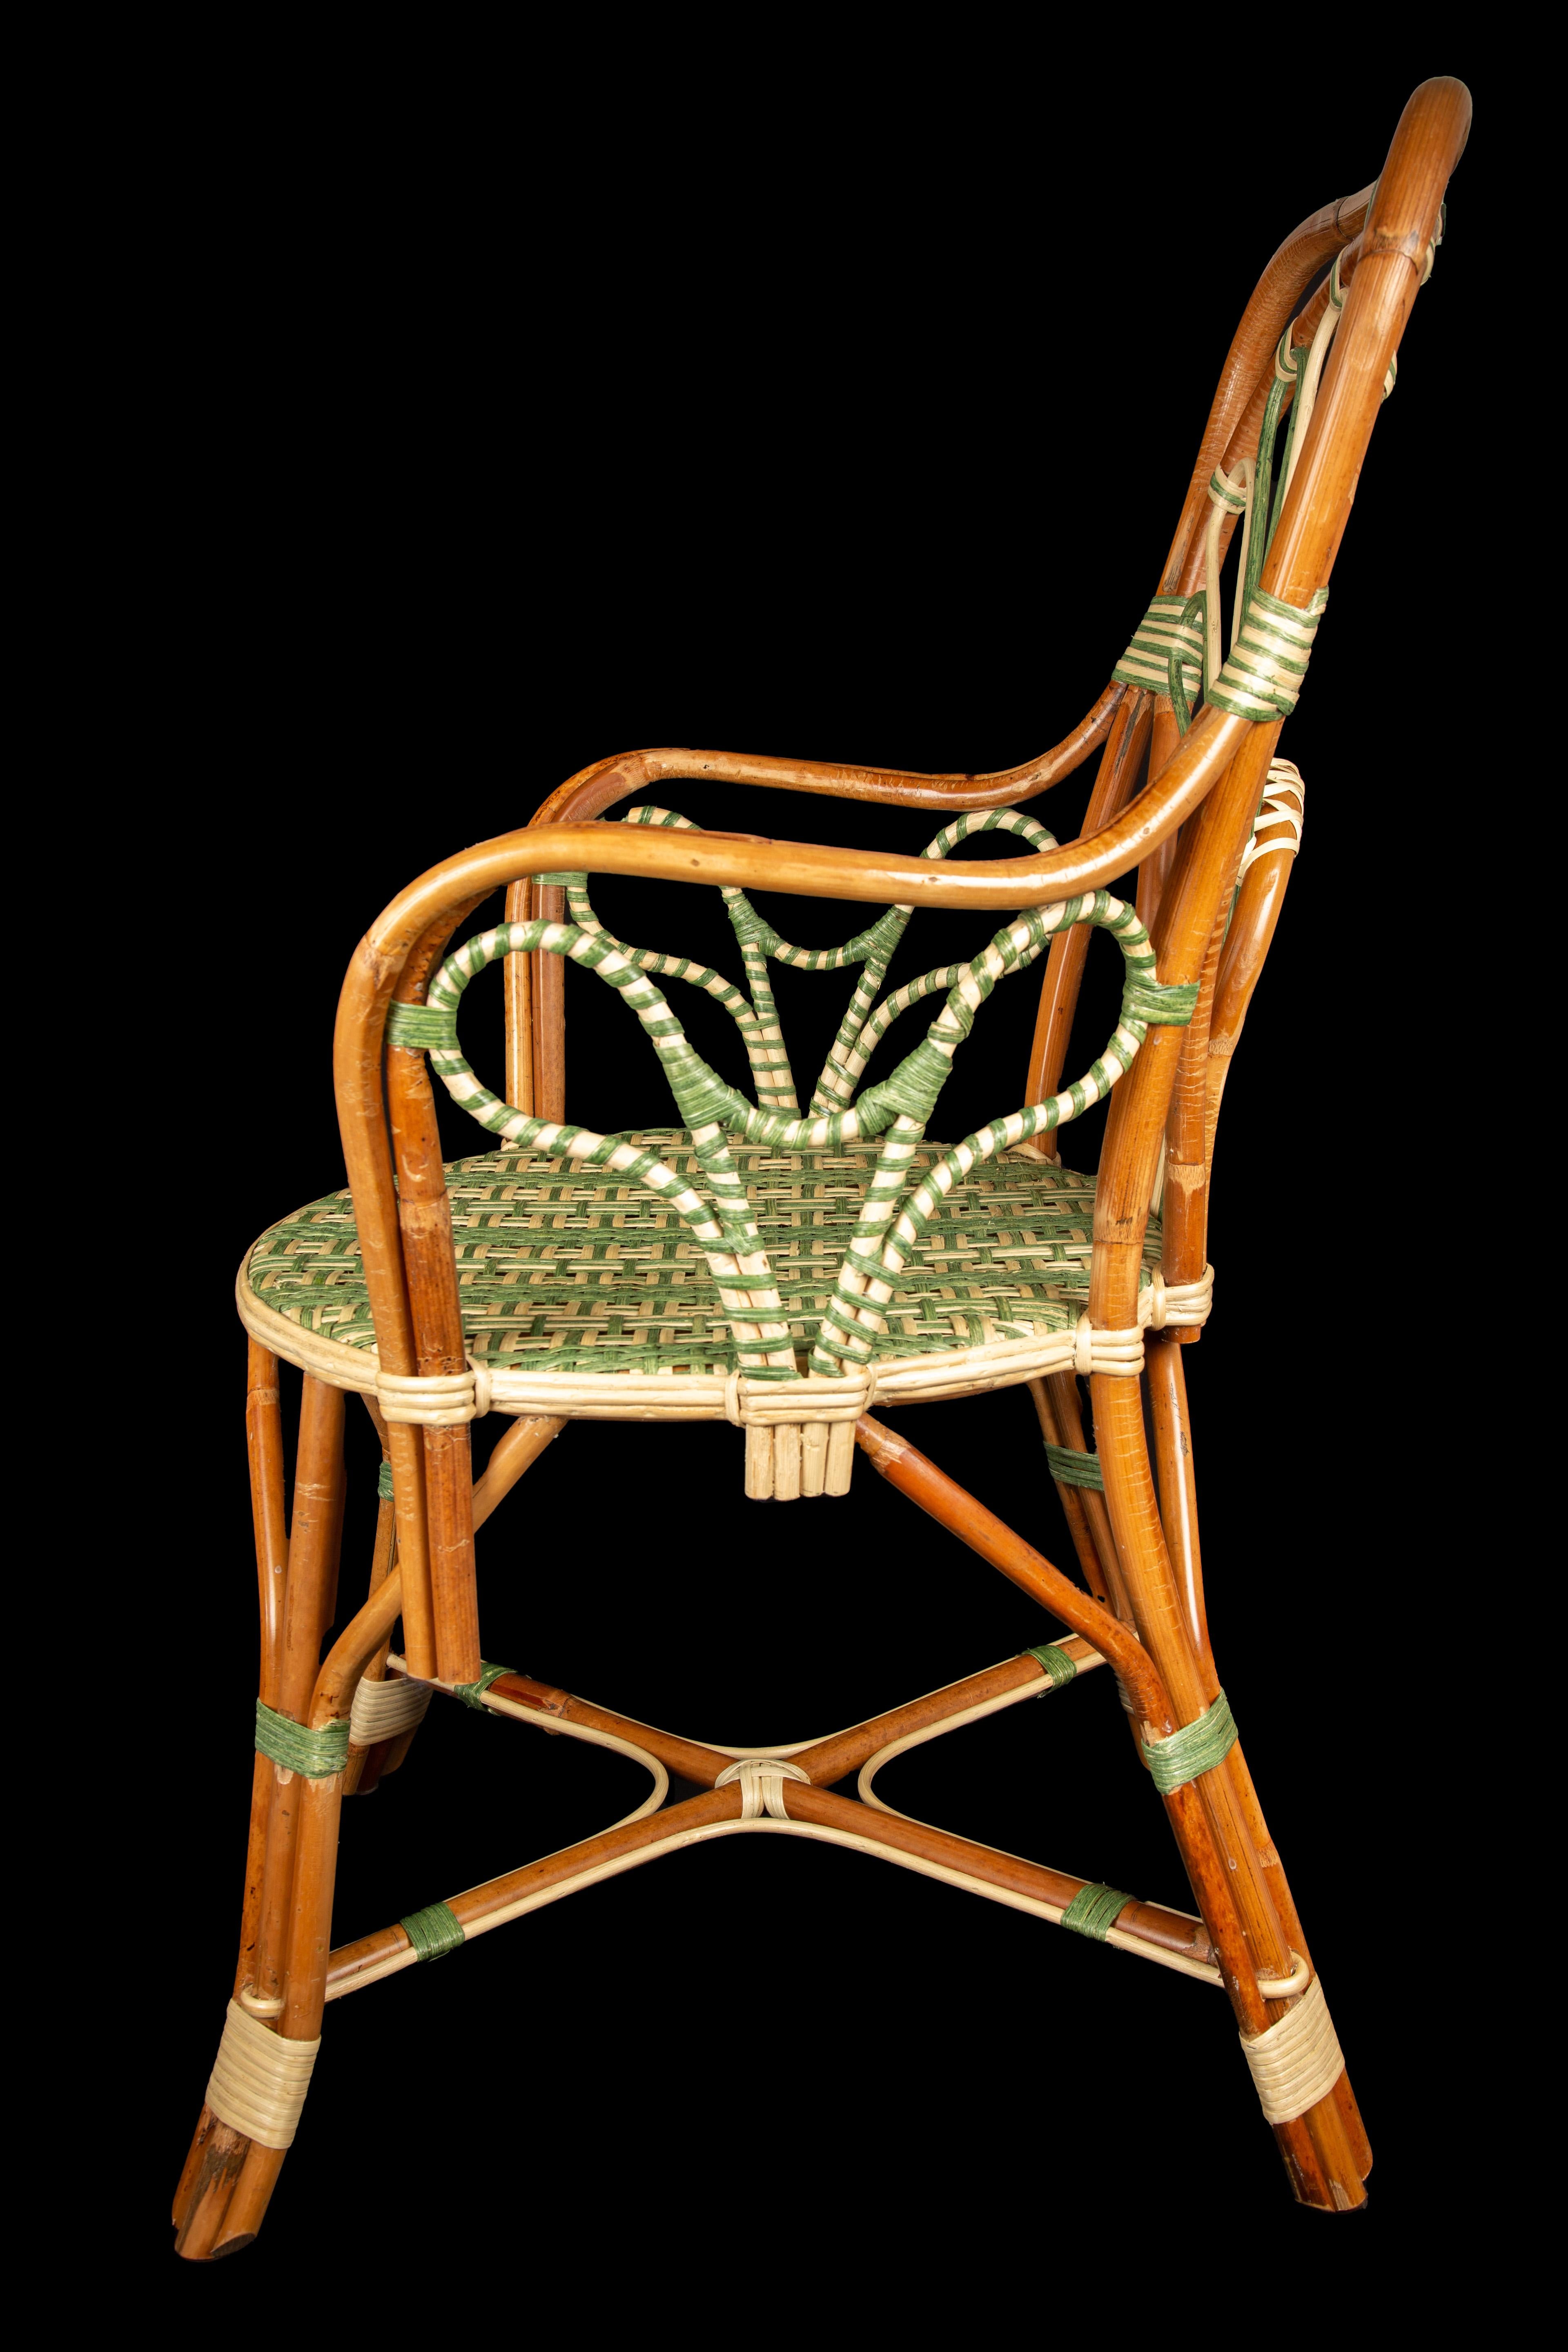 Hand-Woven Peacock Rattan Arm Chair by Creel and Gow For Sale